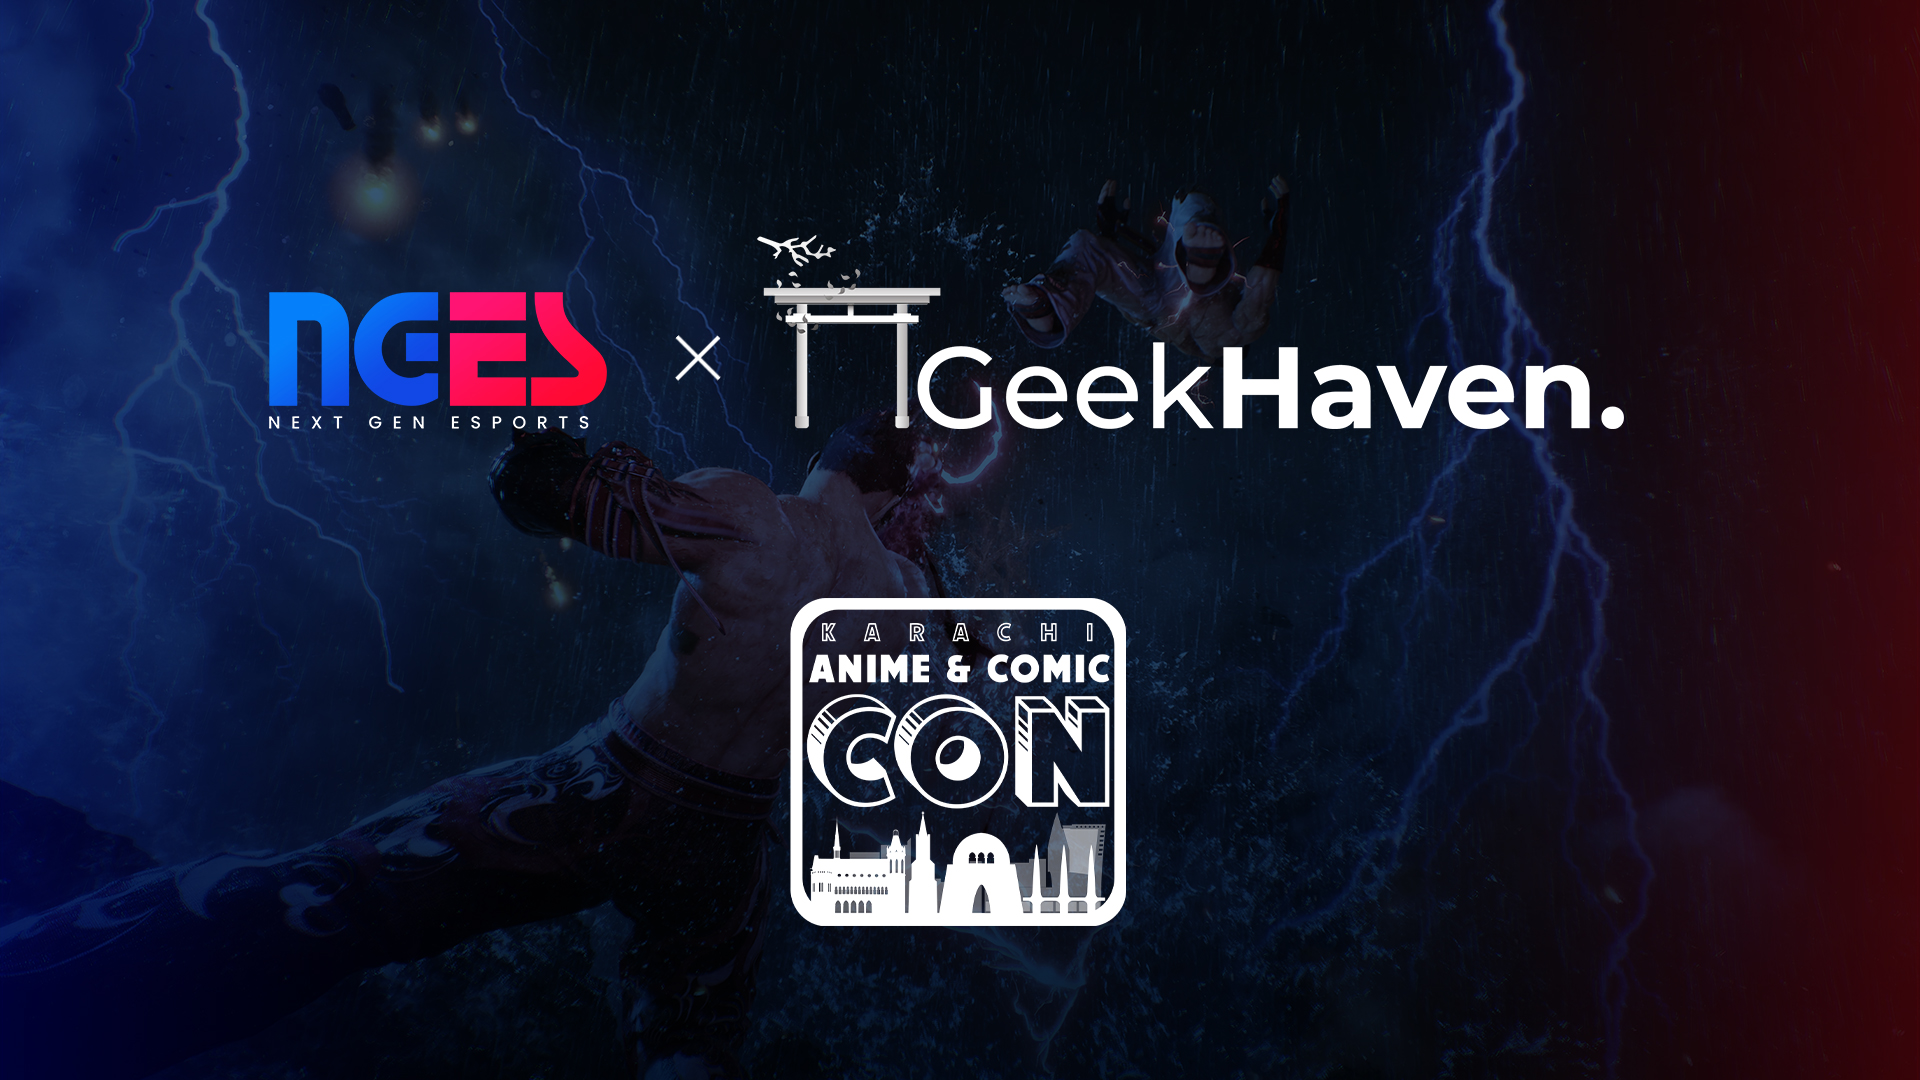 NGES partners with GeekHaven for Karachi Anime & Comic Con